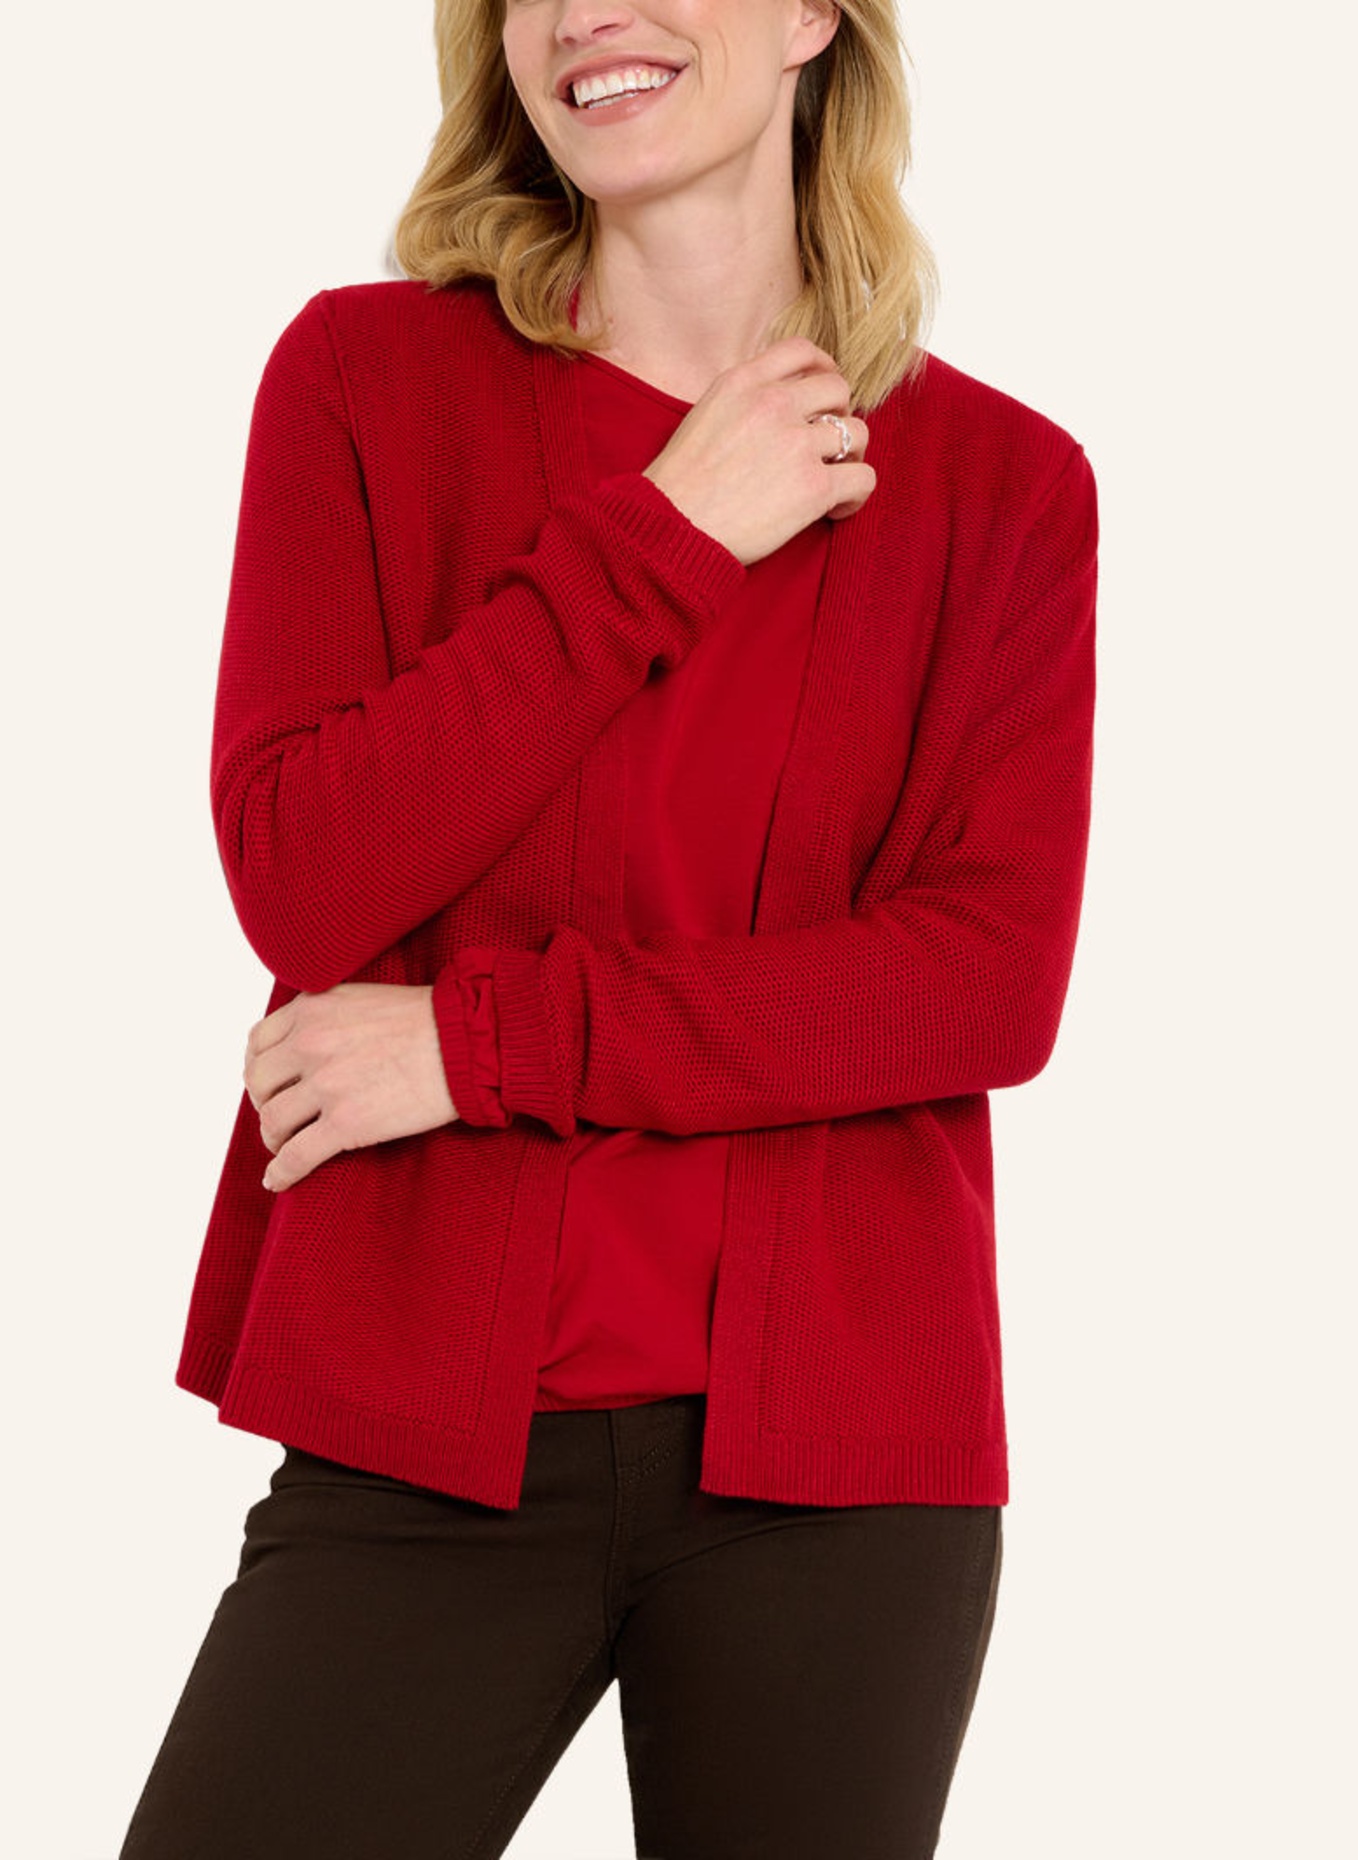 in STYLE ANIQUE BRAX Strickjacke rot